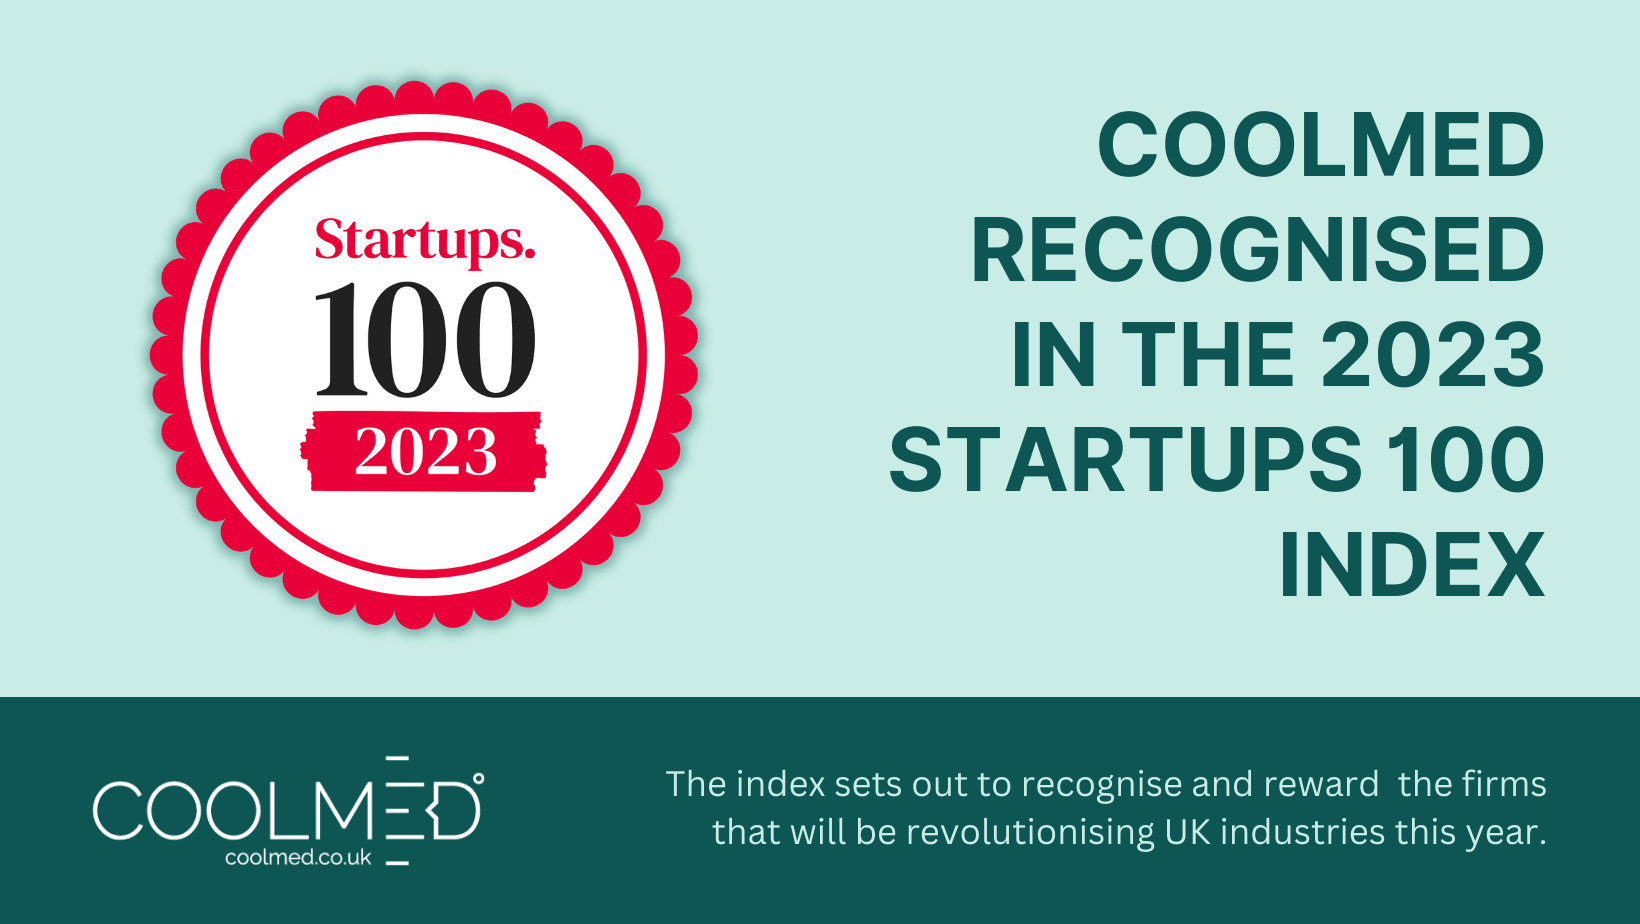 CoolMed featured in The 2023 Startups 100 Index graphic